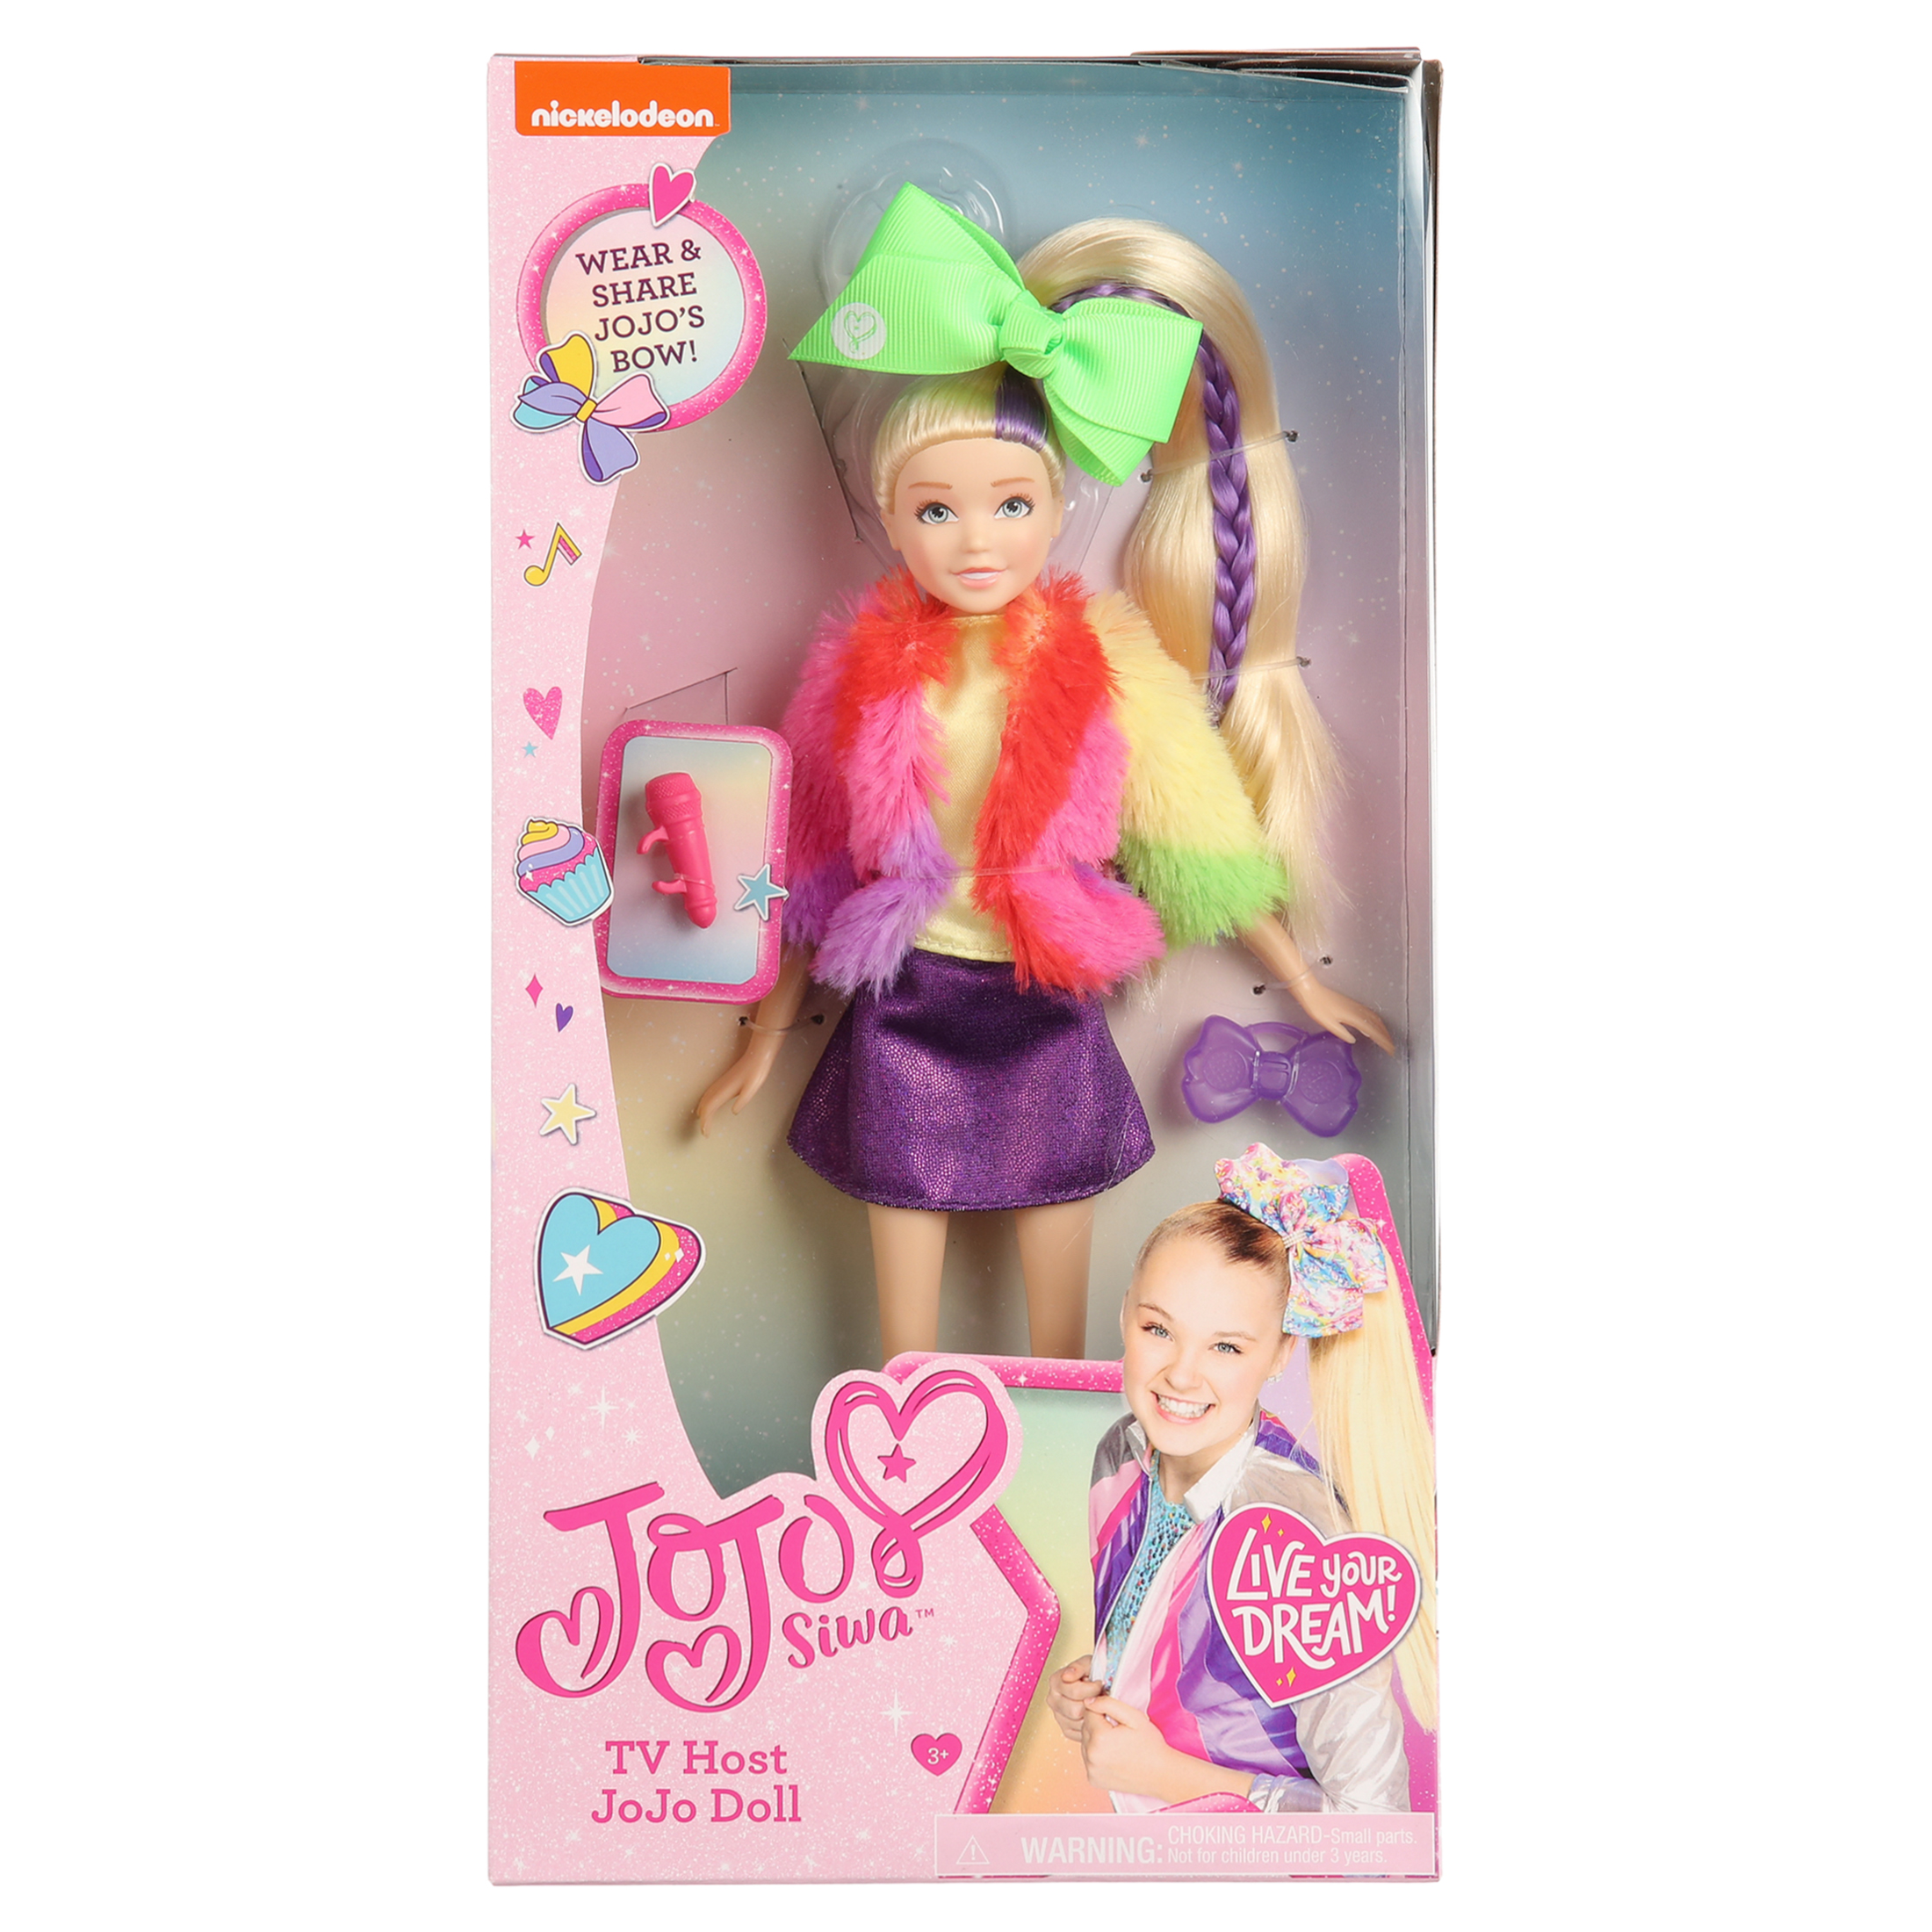 JoJo Siwa Fashion Doll, TV host, 10-inch doll,  Kids Toys for Ages 3 Up, Gifts and Presents - image 3 of 8